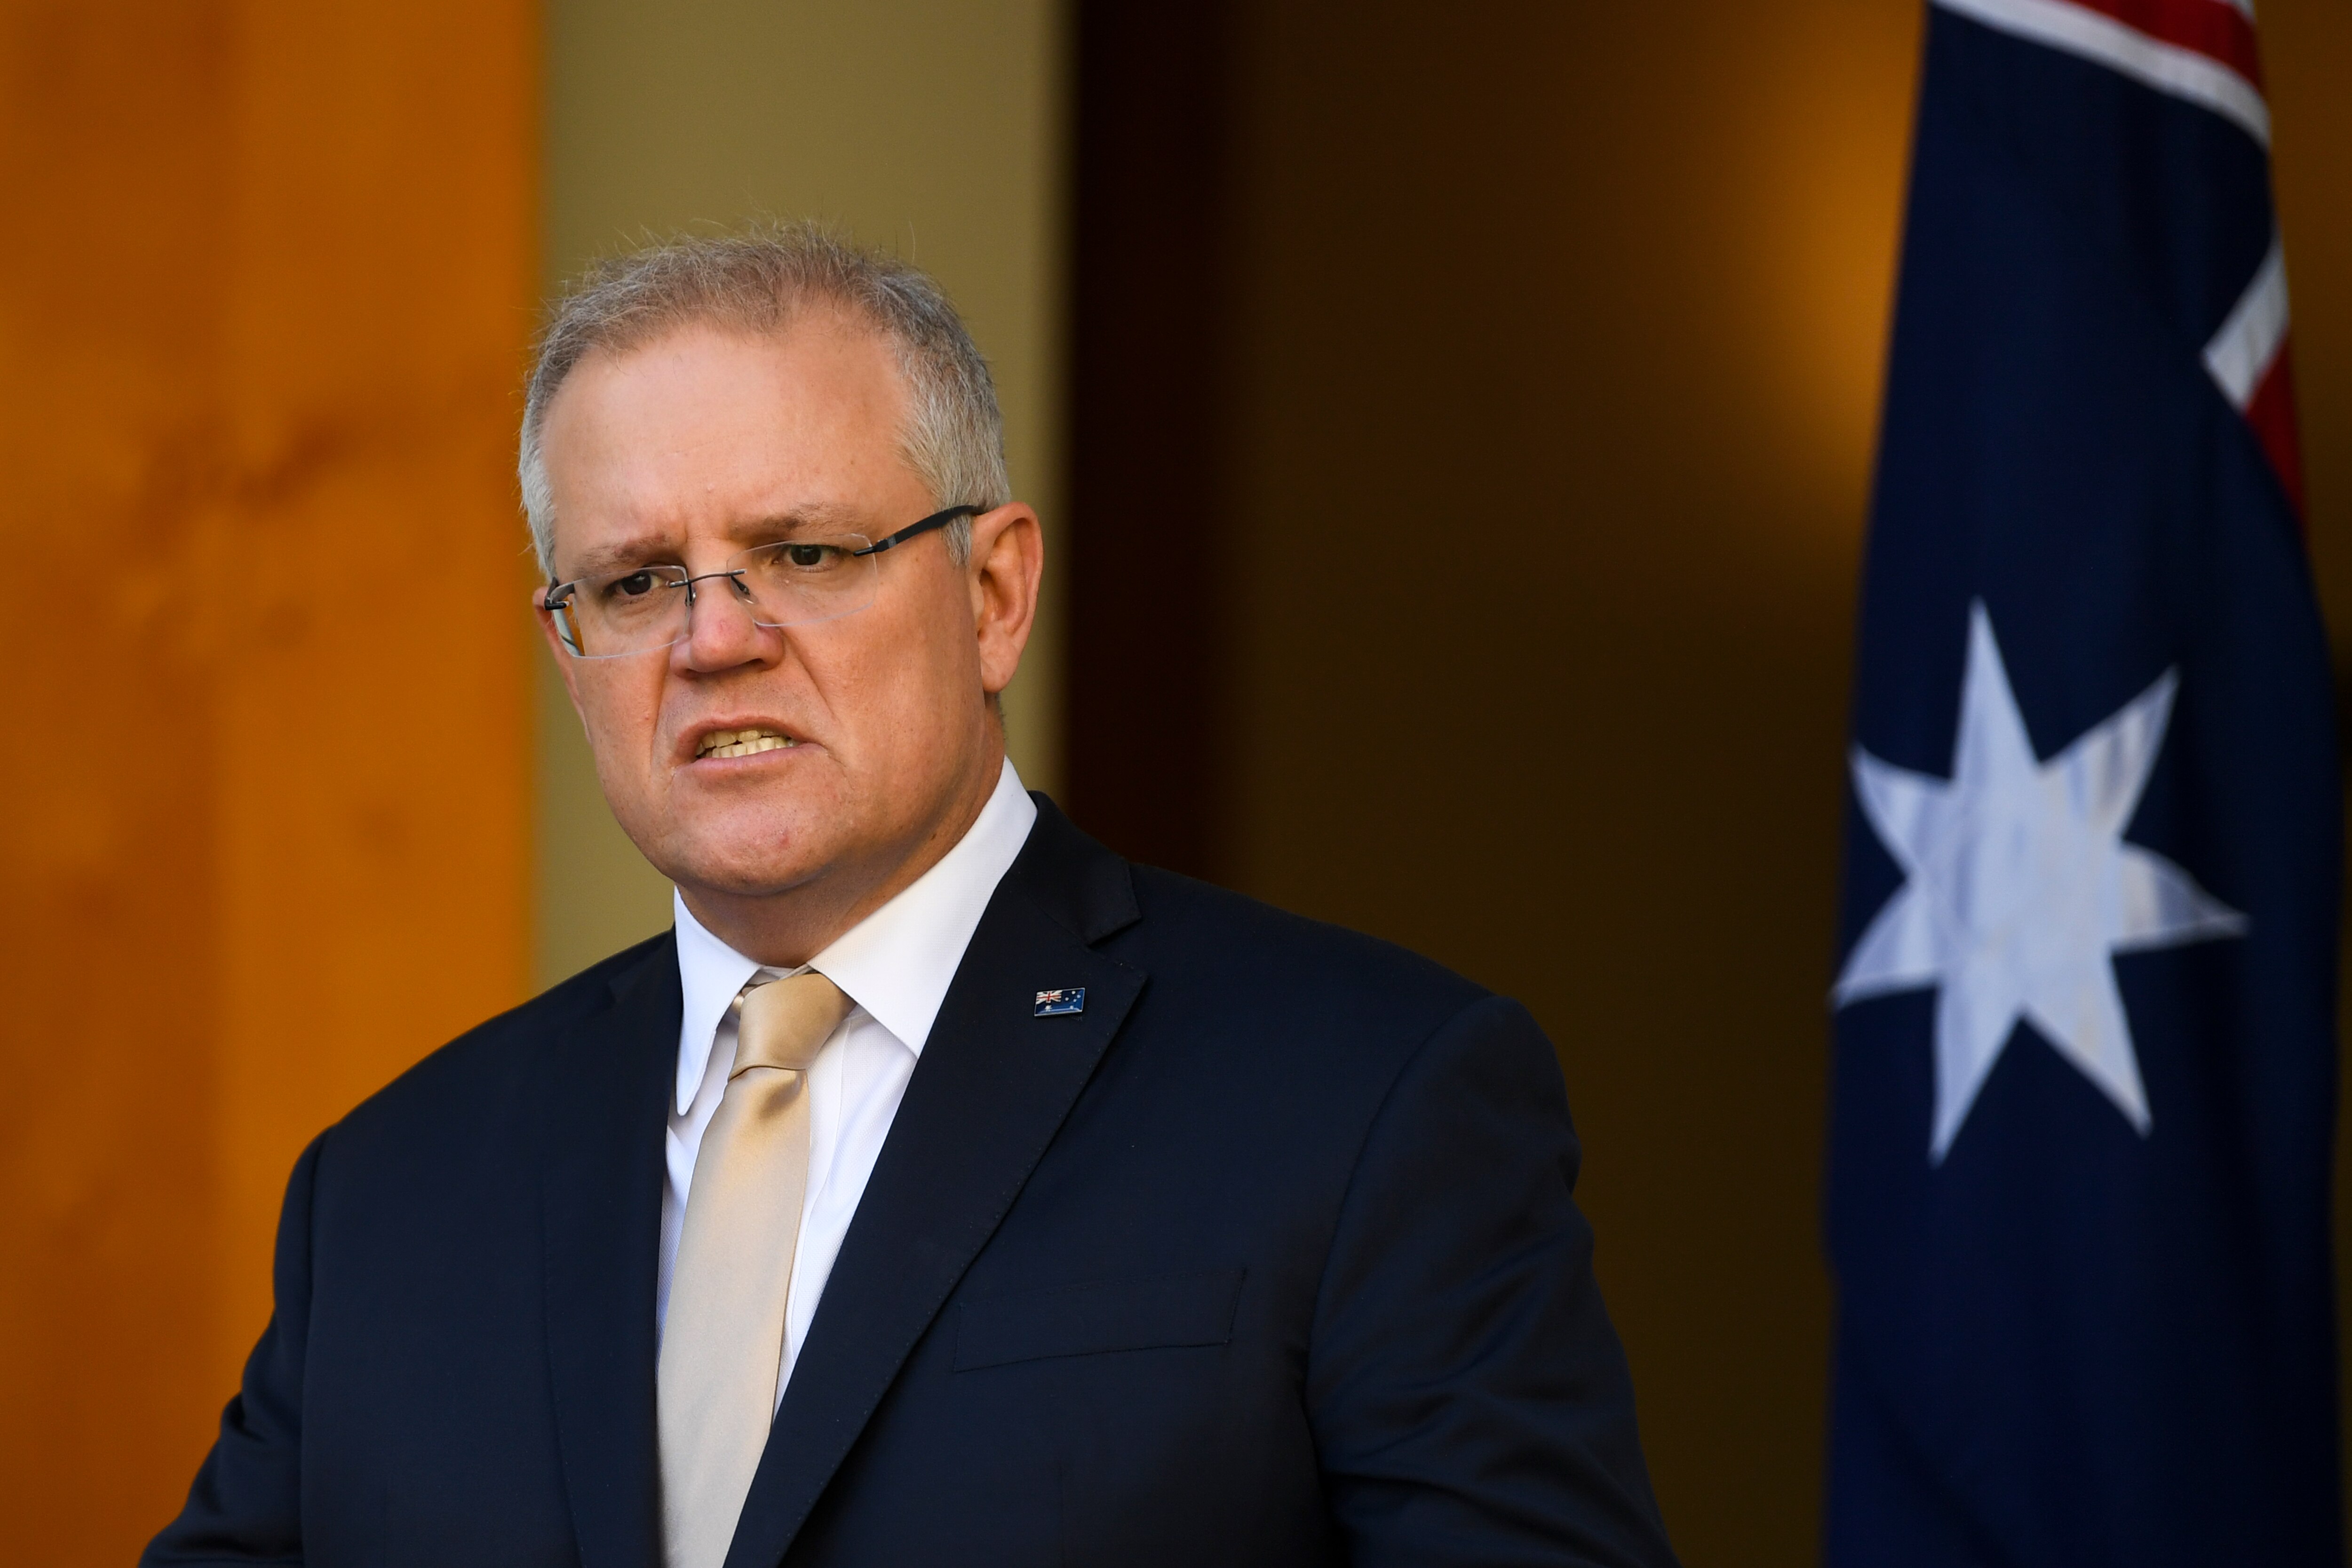 Prime Minister Scott Morrison speaks to the media during a press conference at Parliament House in Canberra.